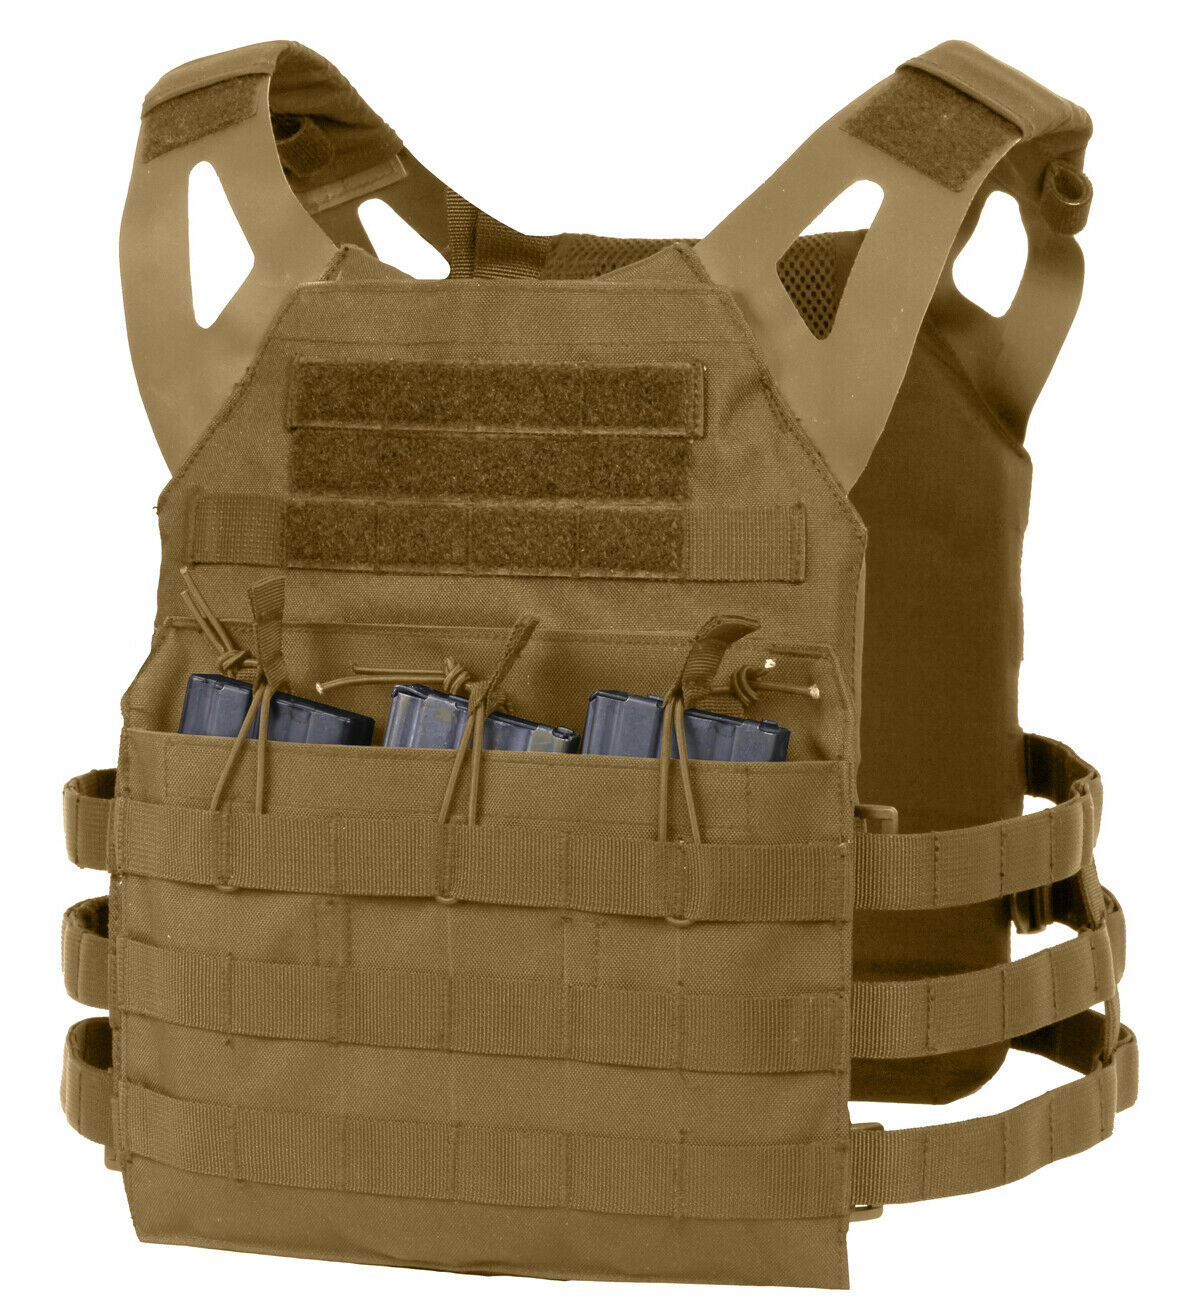 Rothco Lightweight Armor Plate Carrier Vest Oversized 2XL 3XL - Coyote Brown